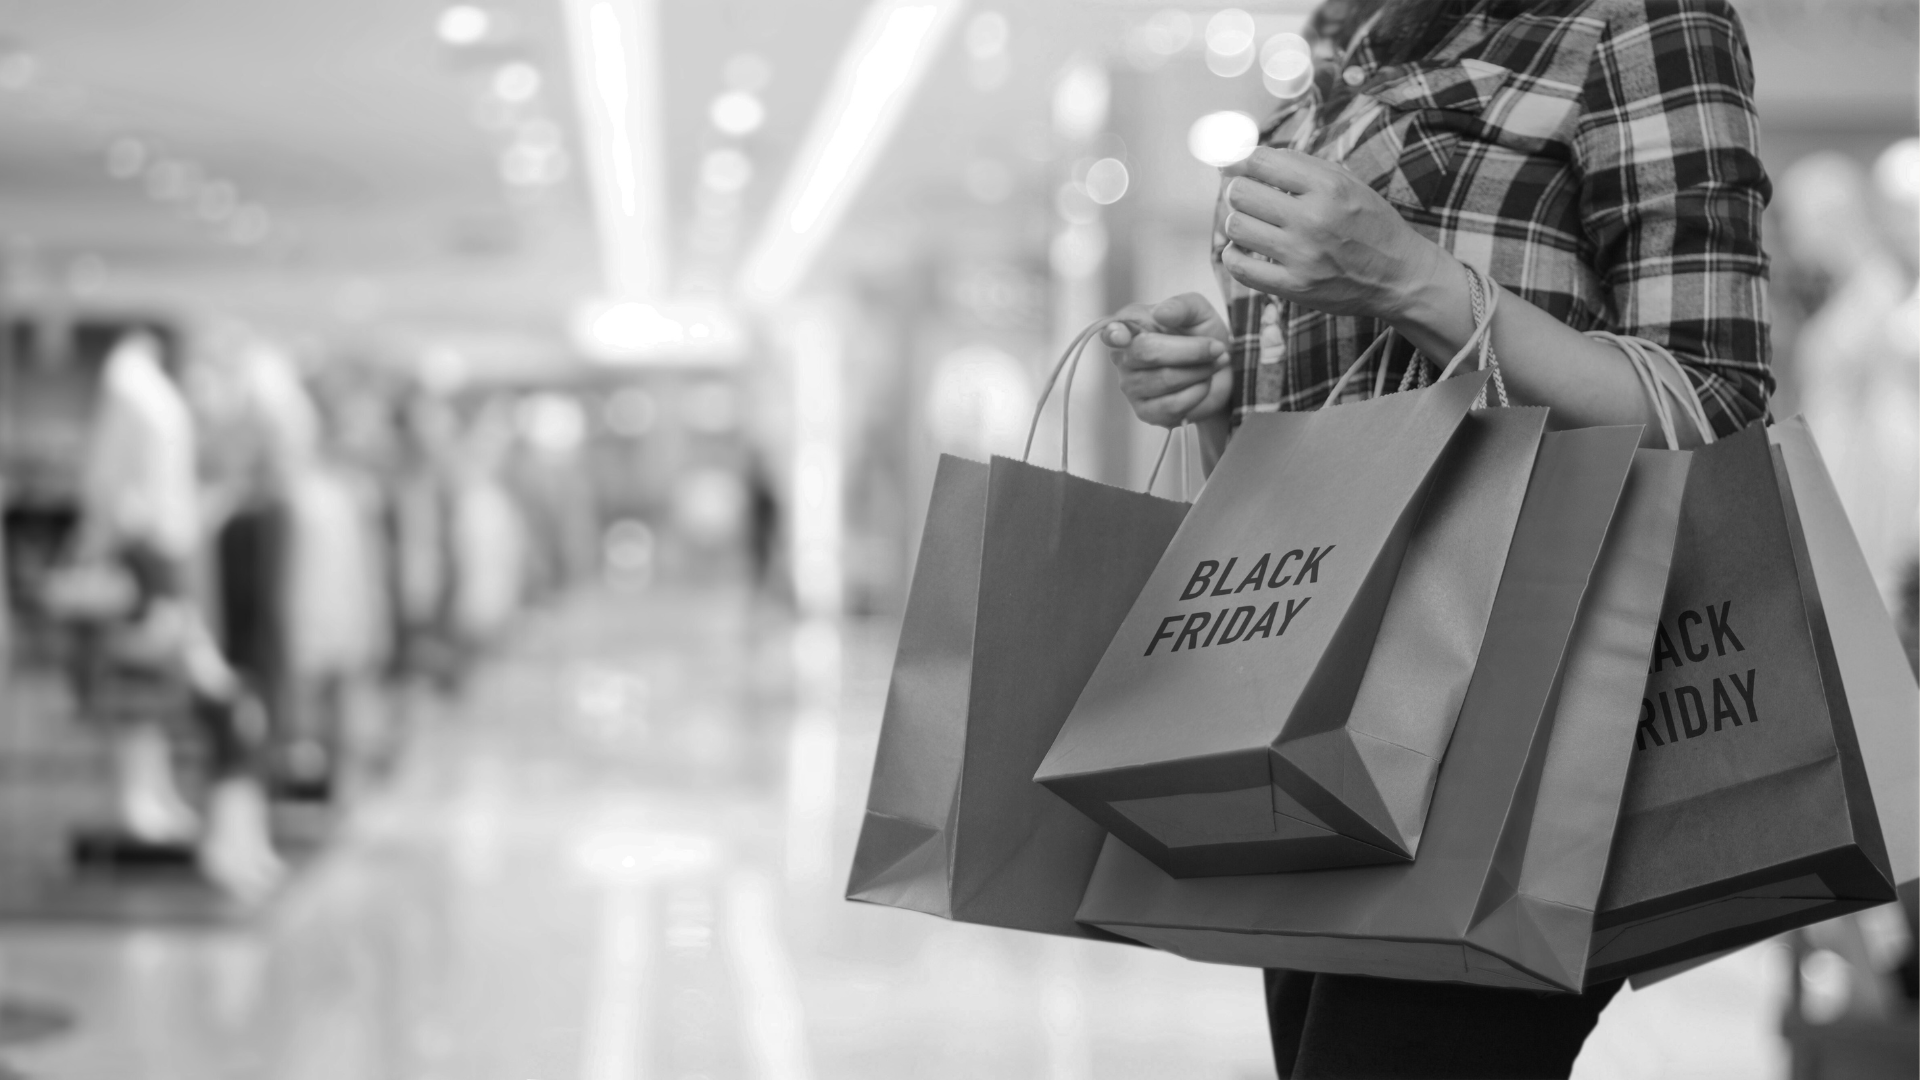 What Higher Education Marketers Can Learn From Black Friday